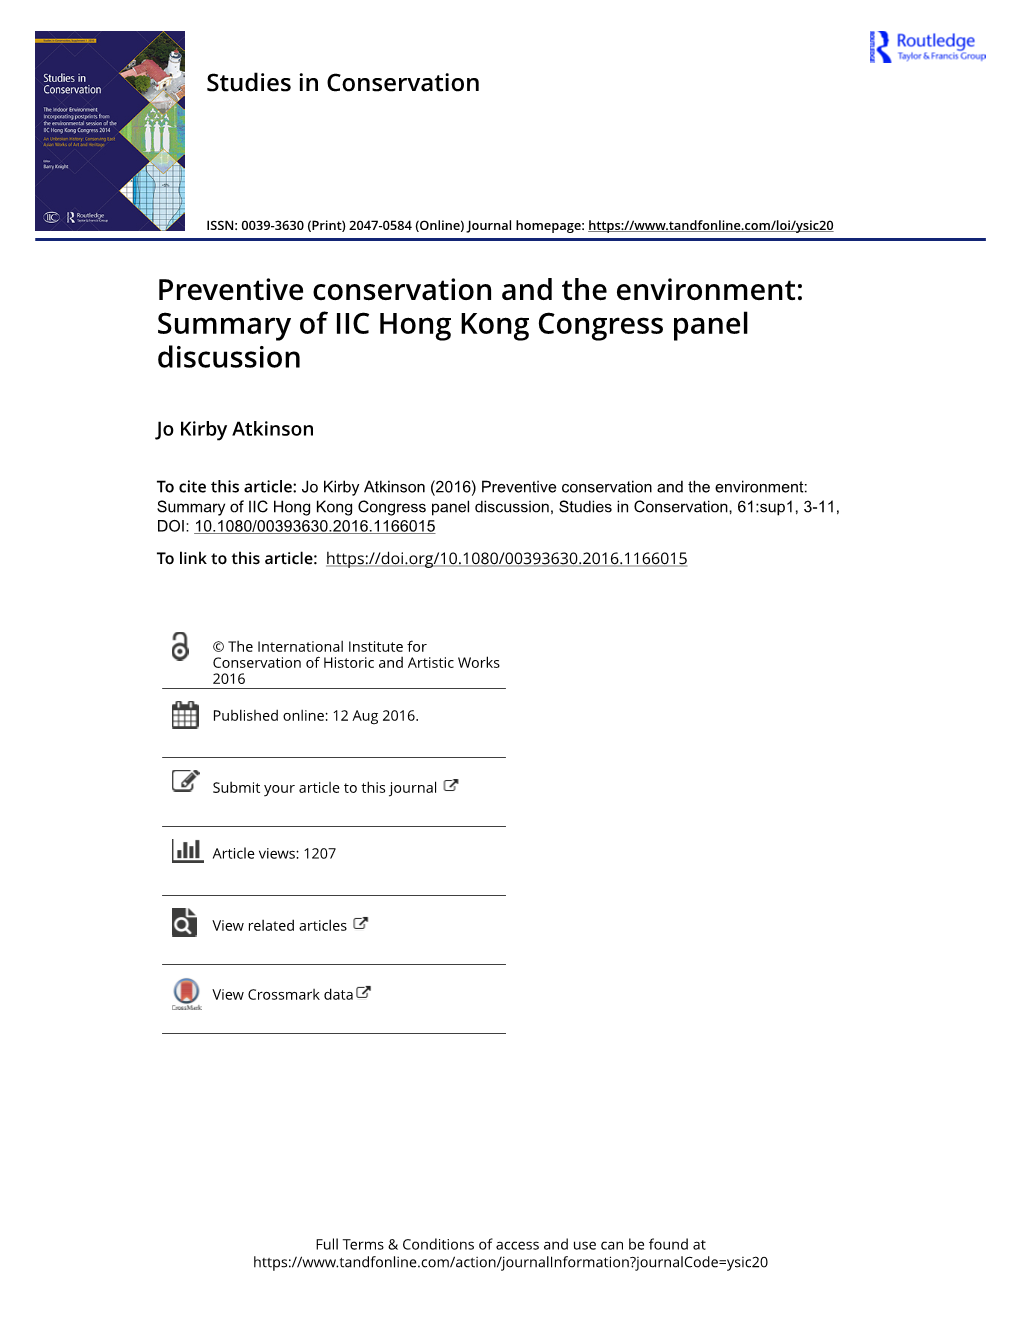 Summary of IIC Hong Kong Congress Panel Discussion